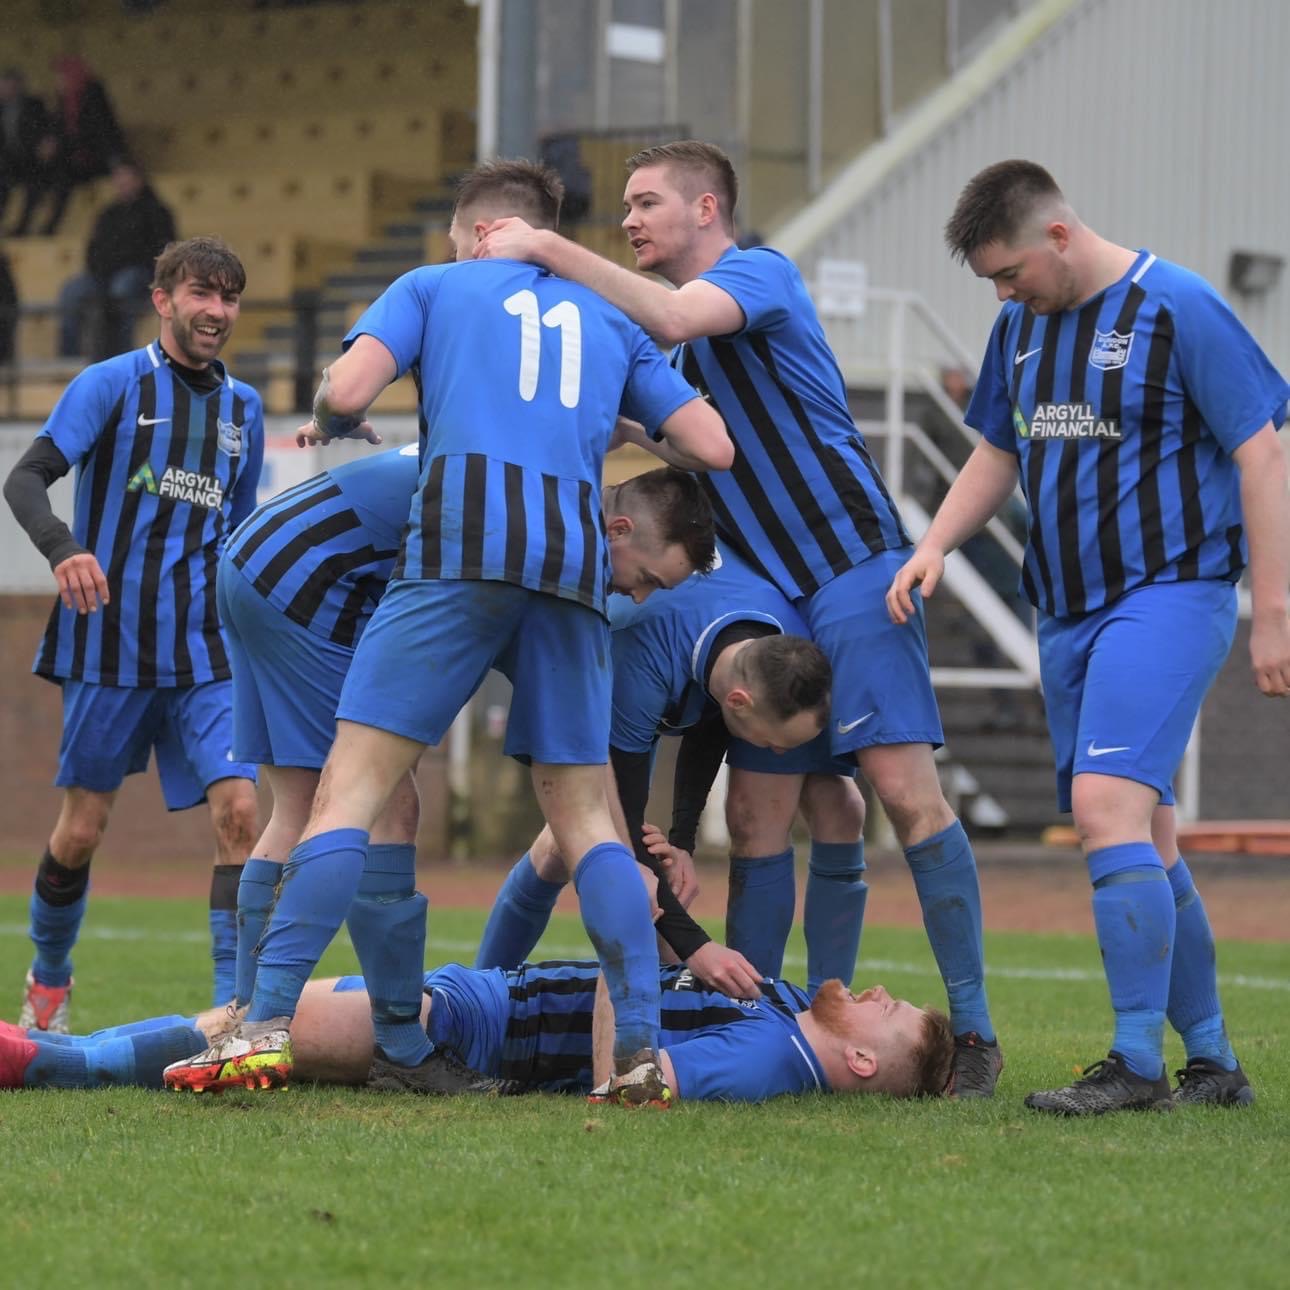 Dunoon Amateurs fold, sparking fears for future of Cowal football